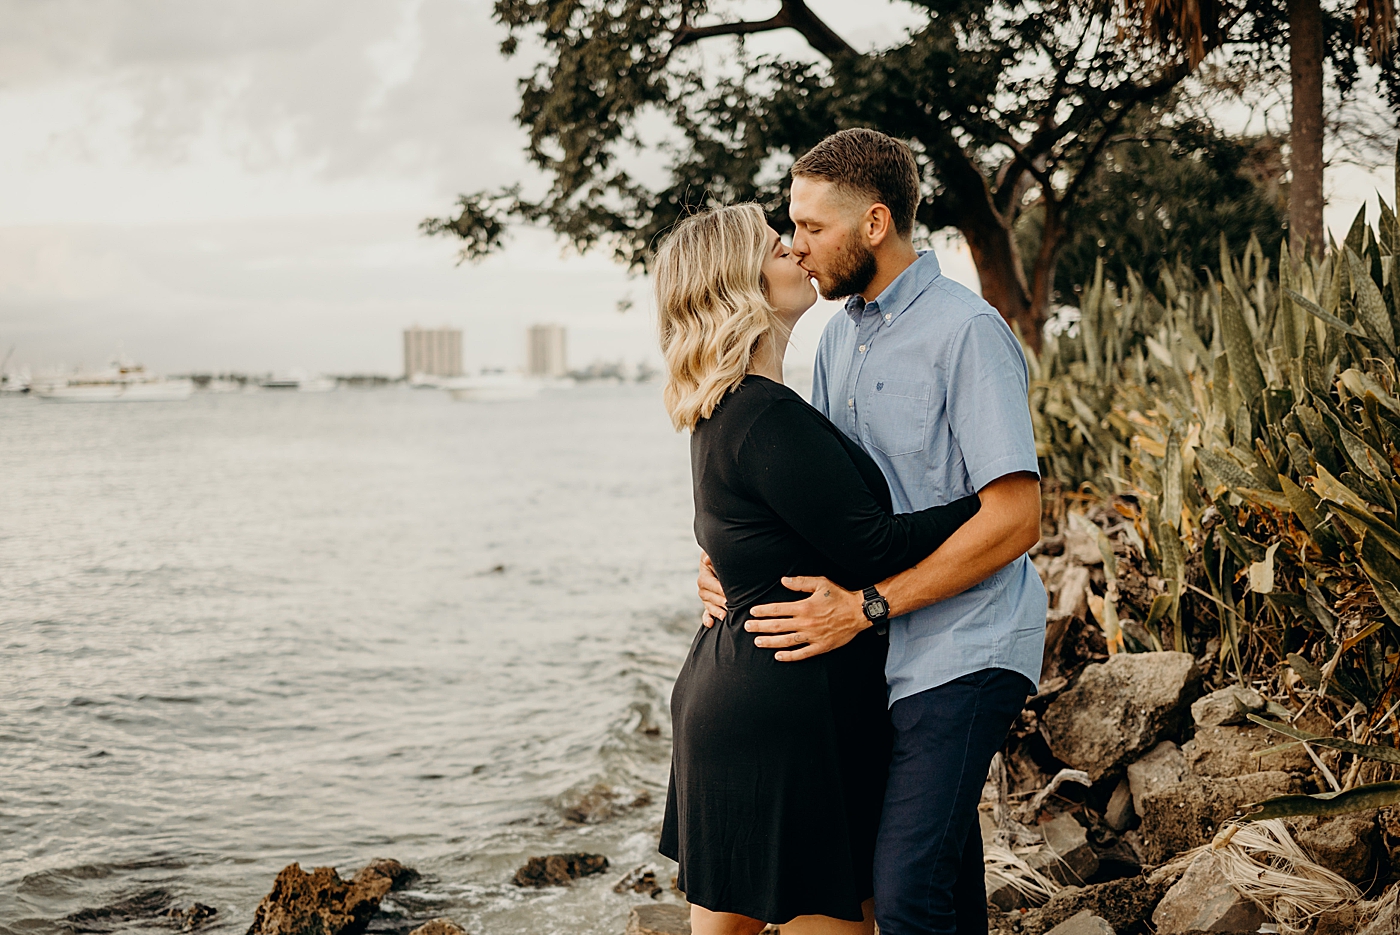 Couple kissing by the water on the beach Palm Beach Island Family Photography by South Florida Family Photographer Maggie Alvarez Photography